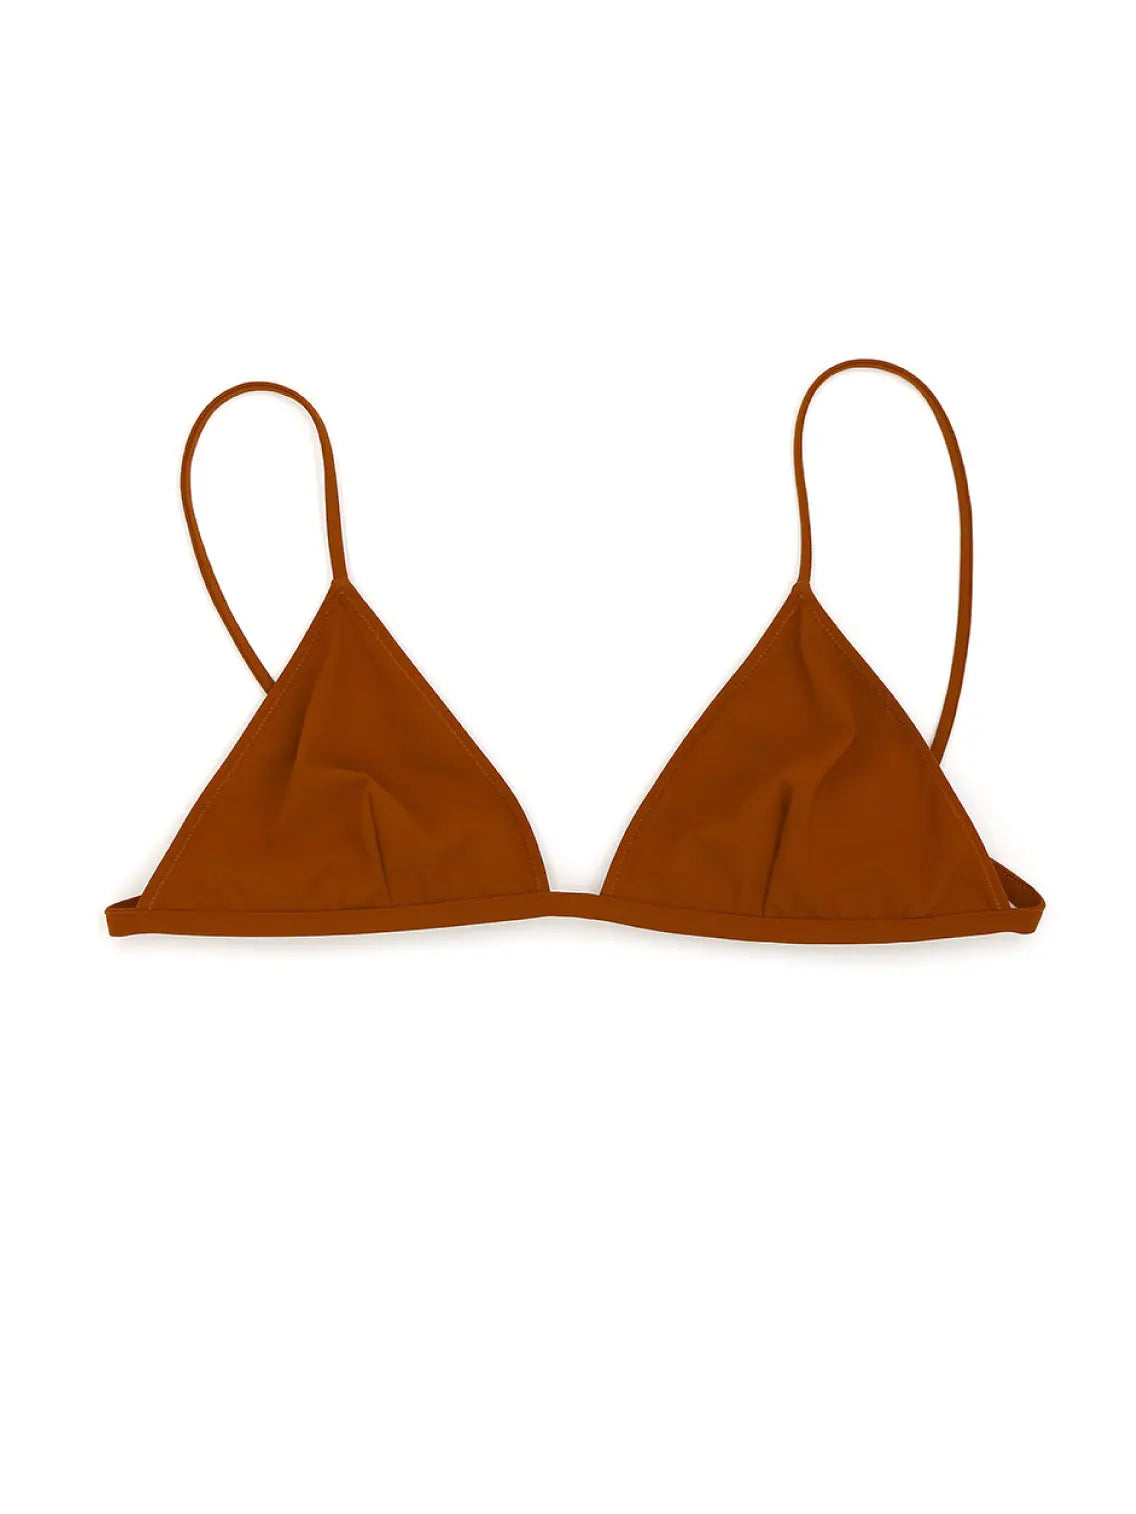 A brown, minimalistic Trentotto Terracota Bikini Top from Lido with thin shoulder straps and a simple design is laid flat against a white background.